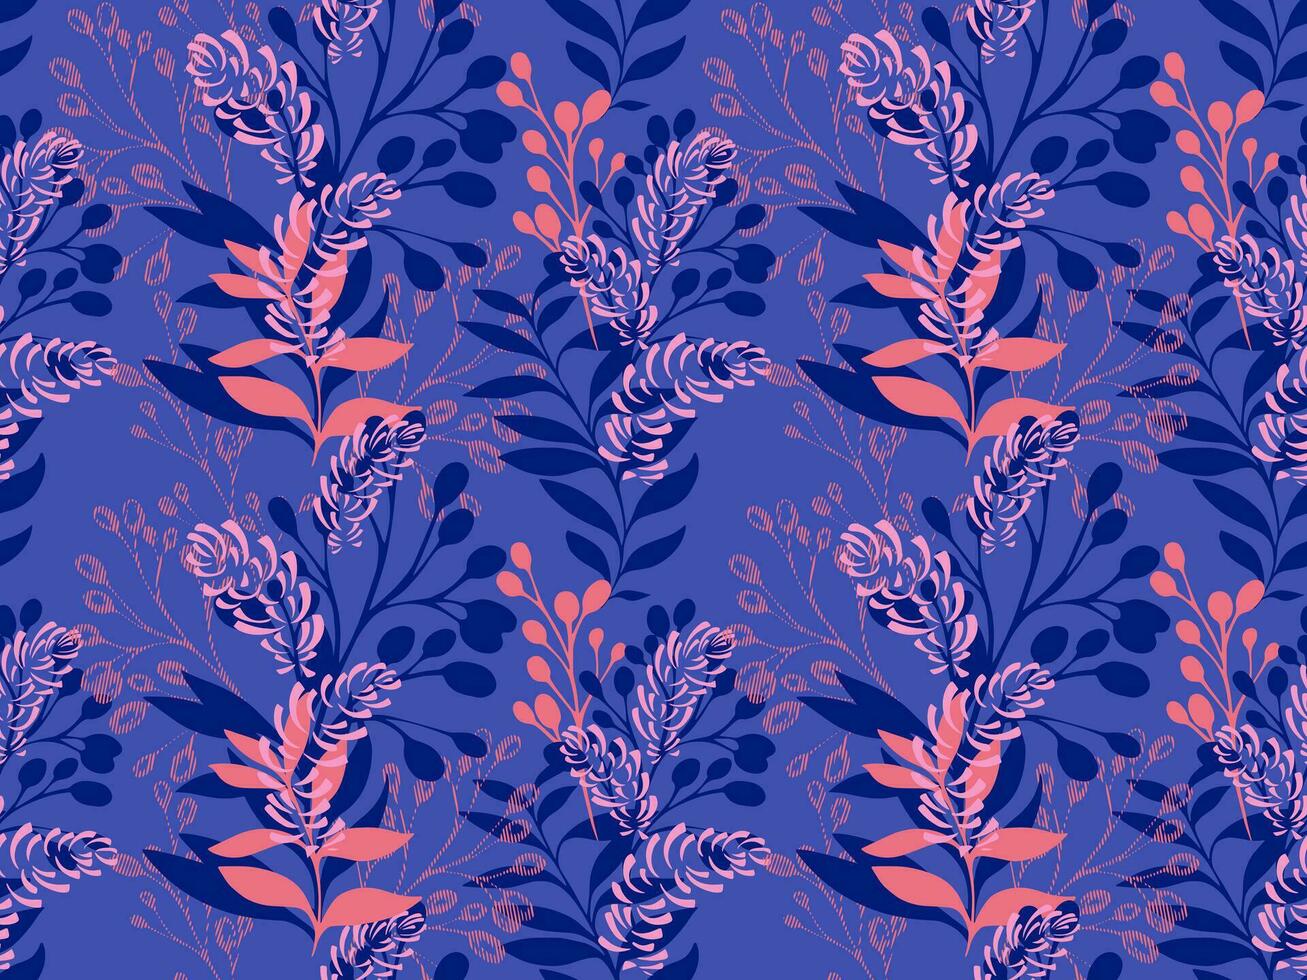 Colorful seamless pattern with artistic shapes of branches leaf stems. Creative bright silhouettes of leaves on a blue print on the background. Vector hand drawn sketch. Design for fashion, fabric